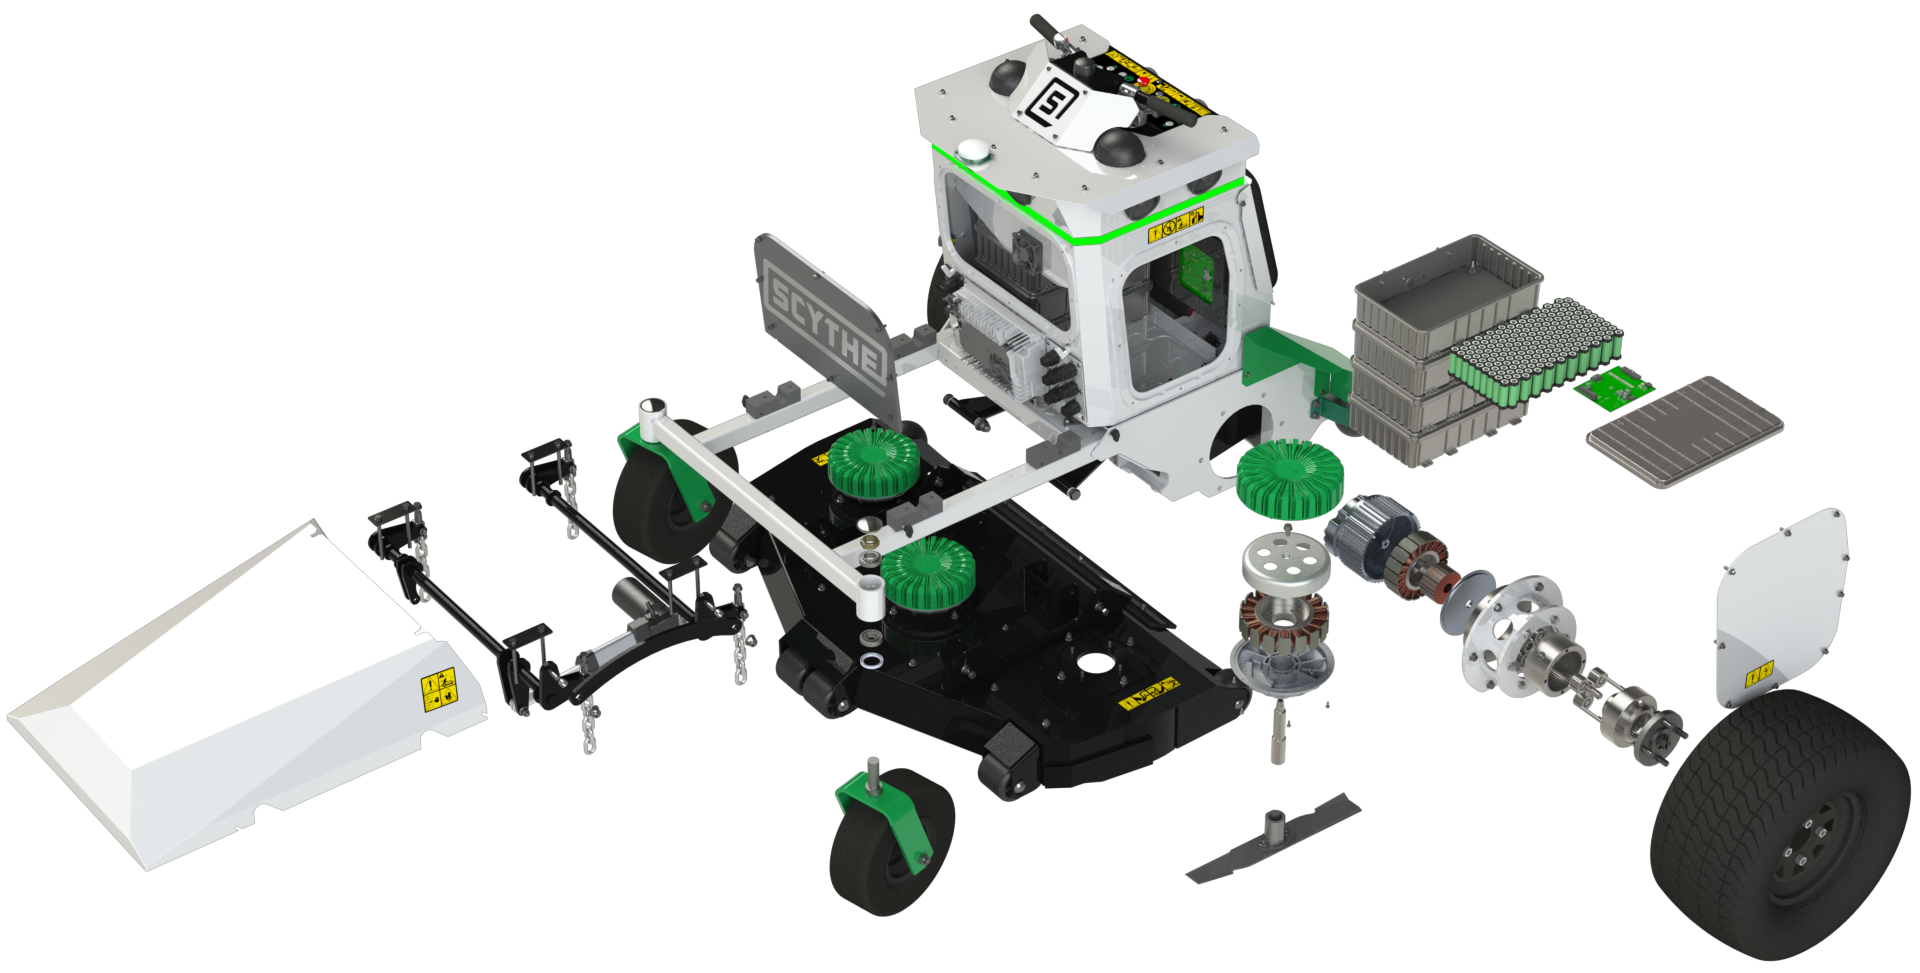 Exploded view of the robot that we designed from the ground-up